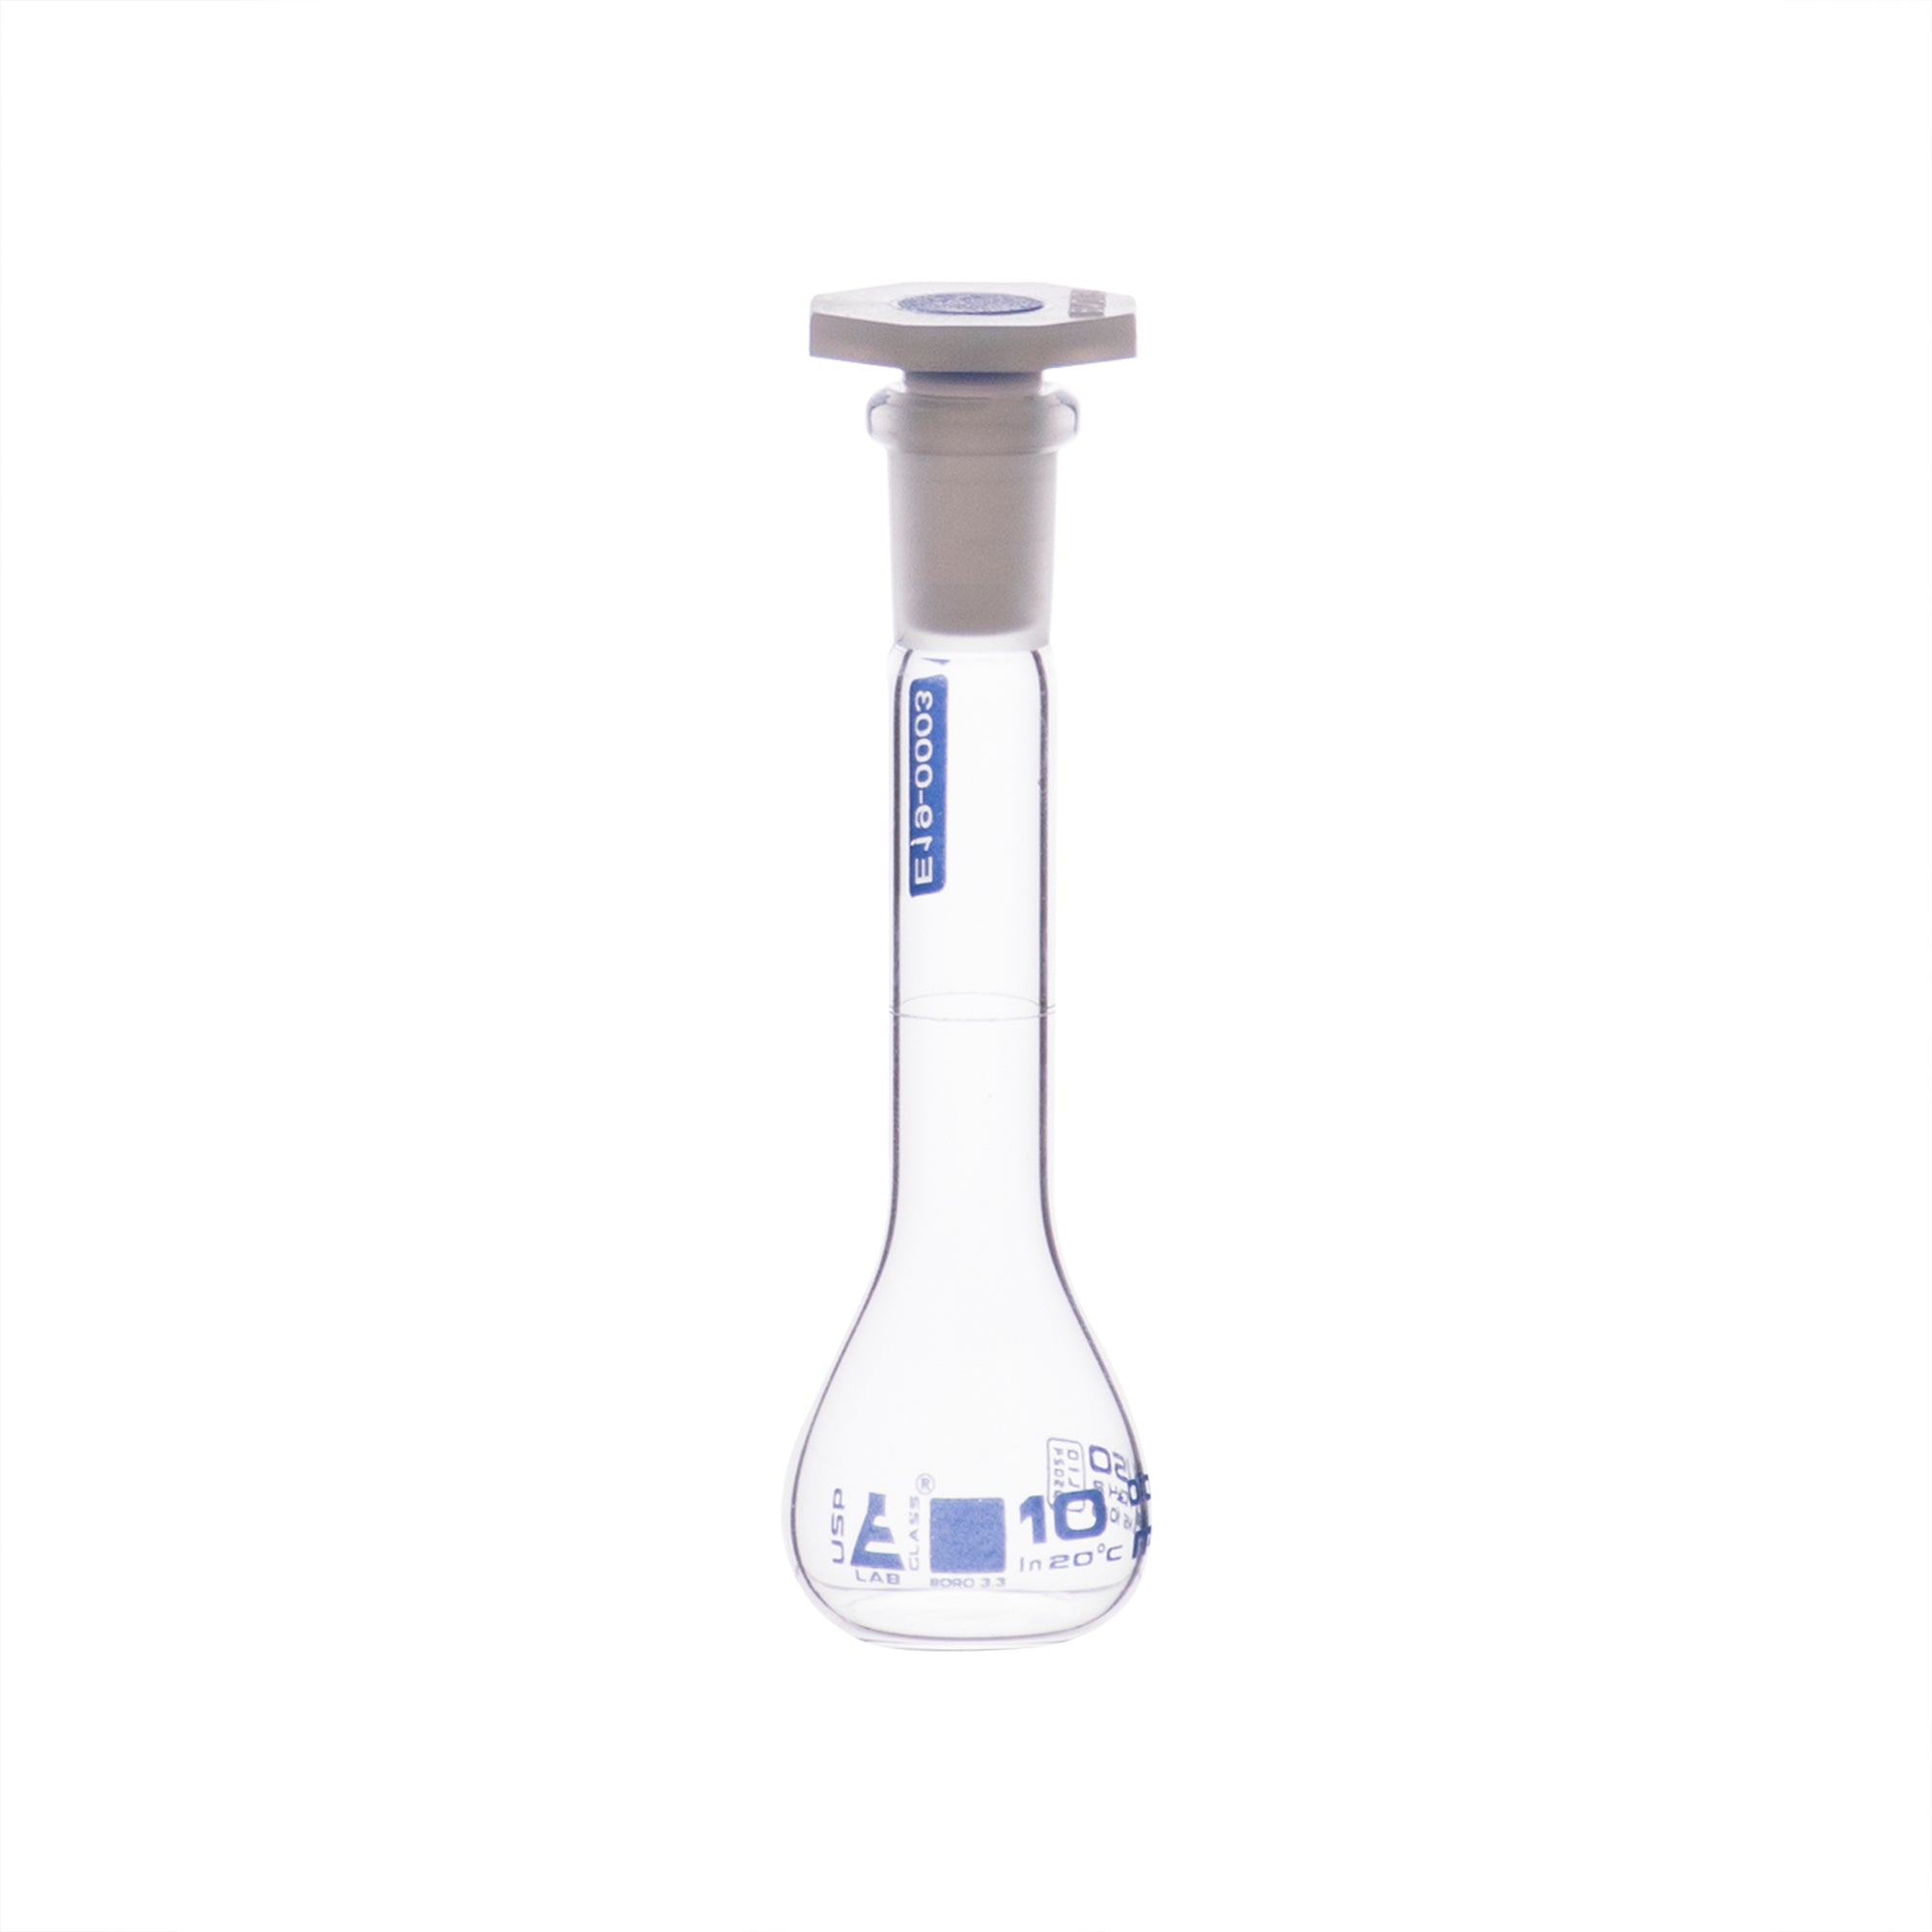 Borosilicate Glass Volumetric Flask with Solid Glass Stopper, 10 ml, USP Class A with Individual Work Certificate,  Pack of 2, Autoclavable